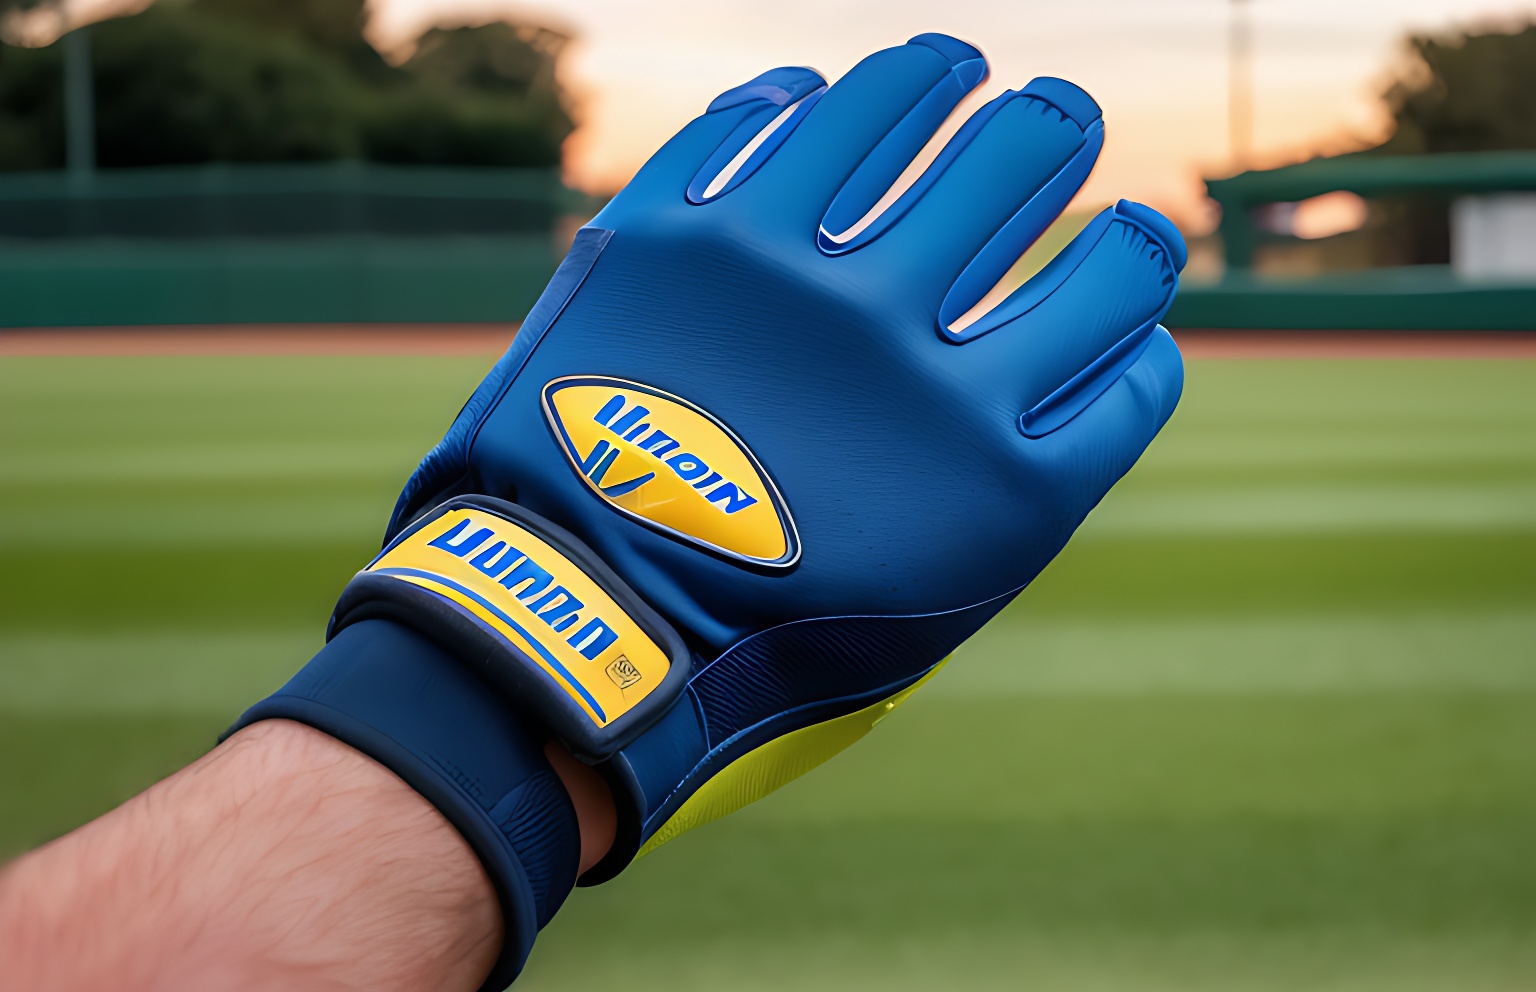 Why Do Players Wear Batting Gloves in Baseball?